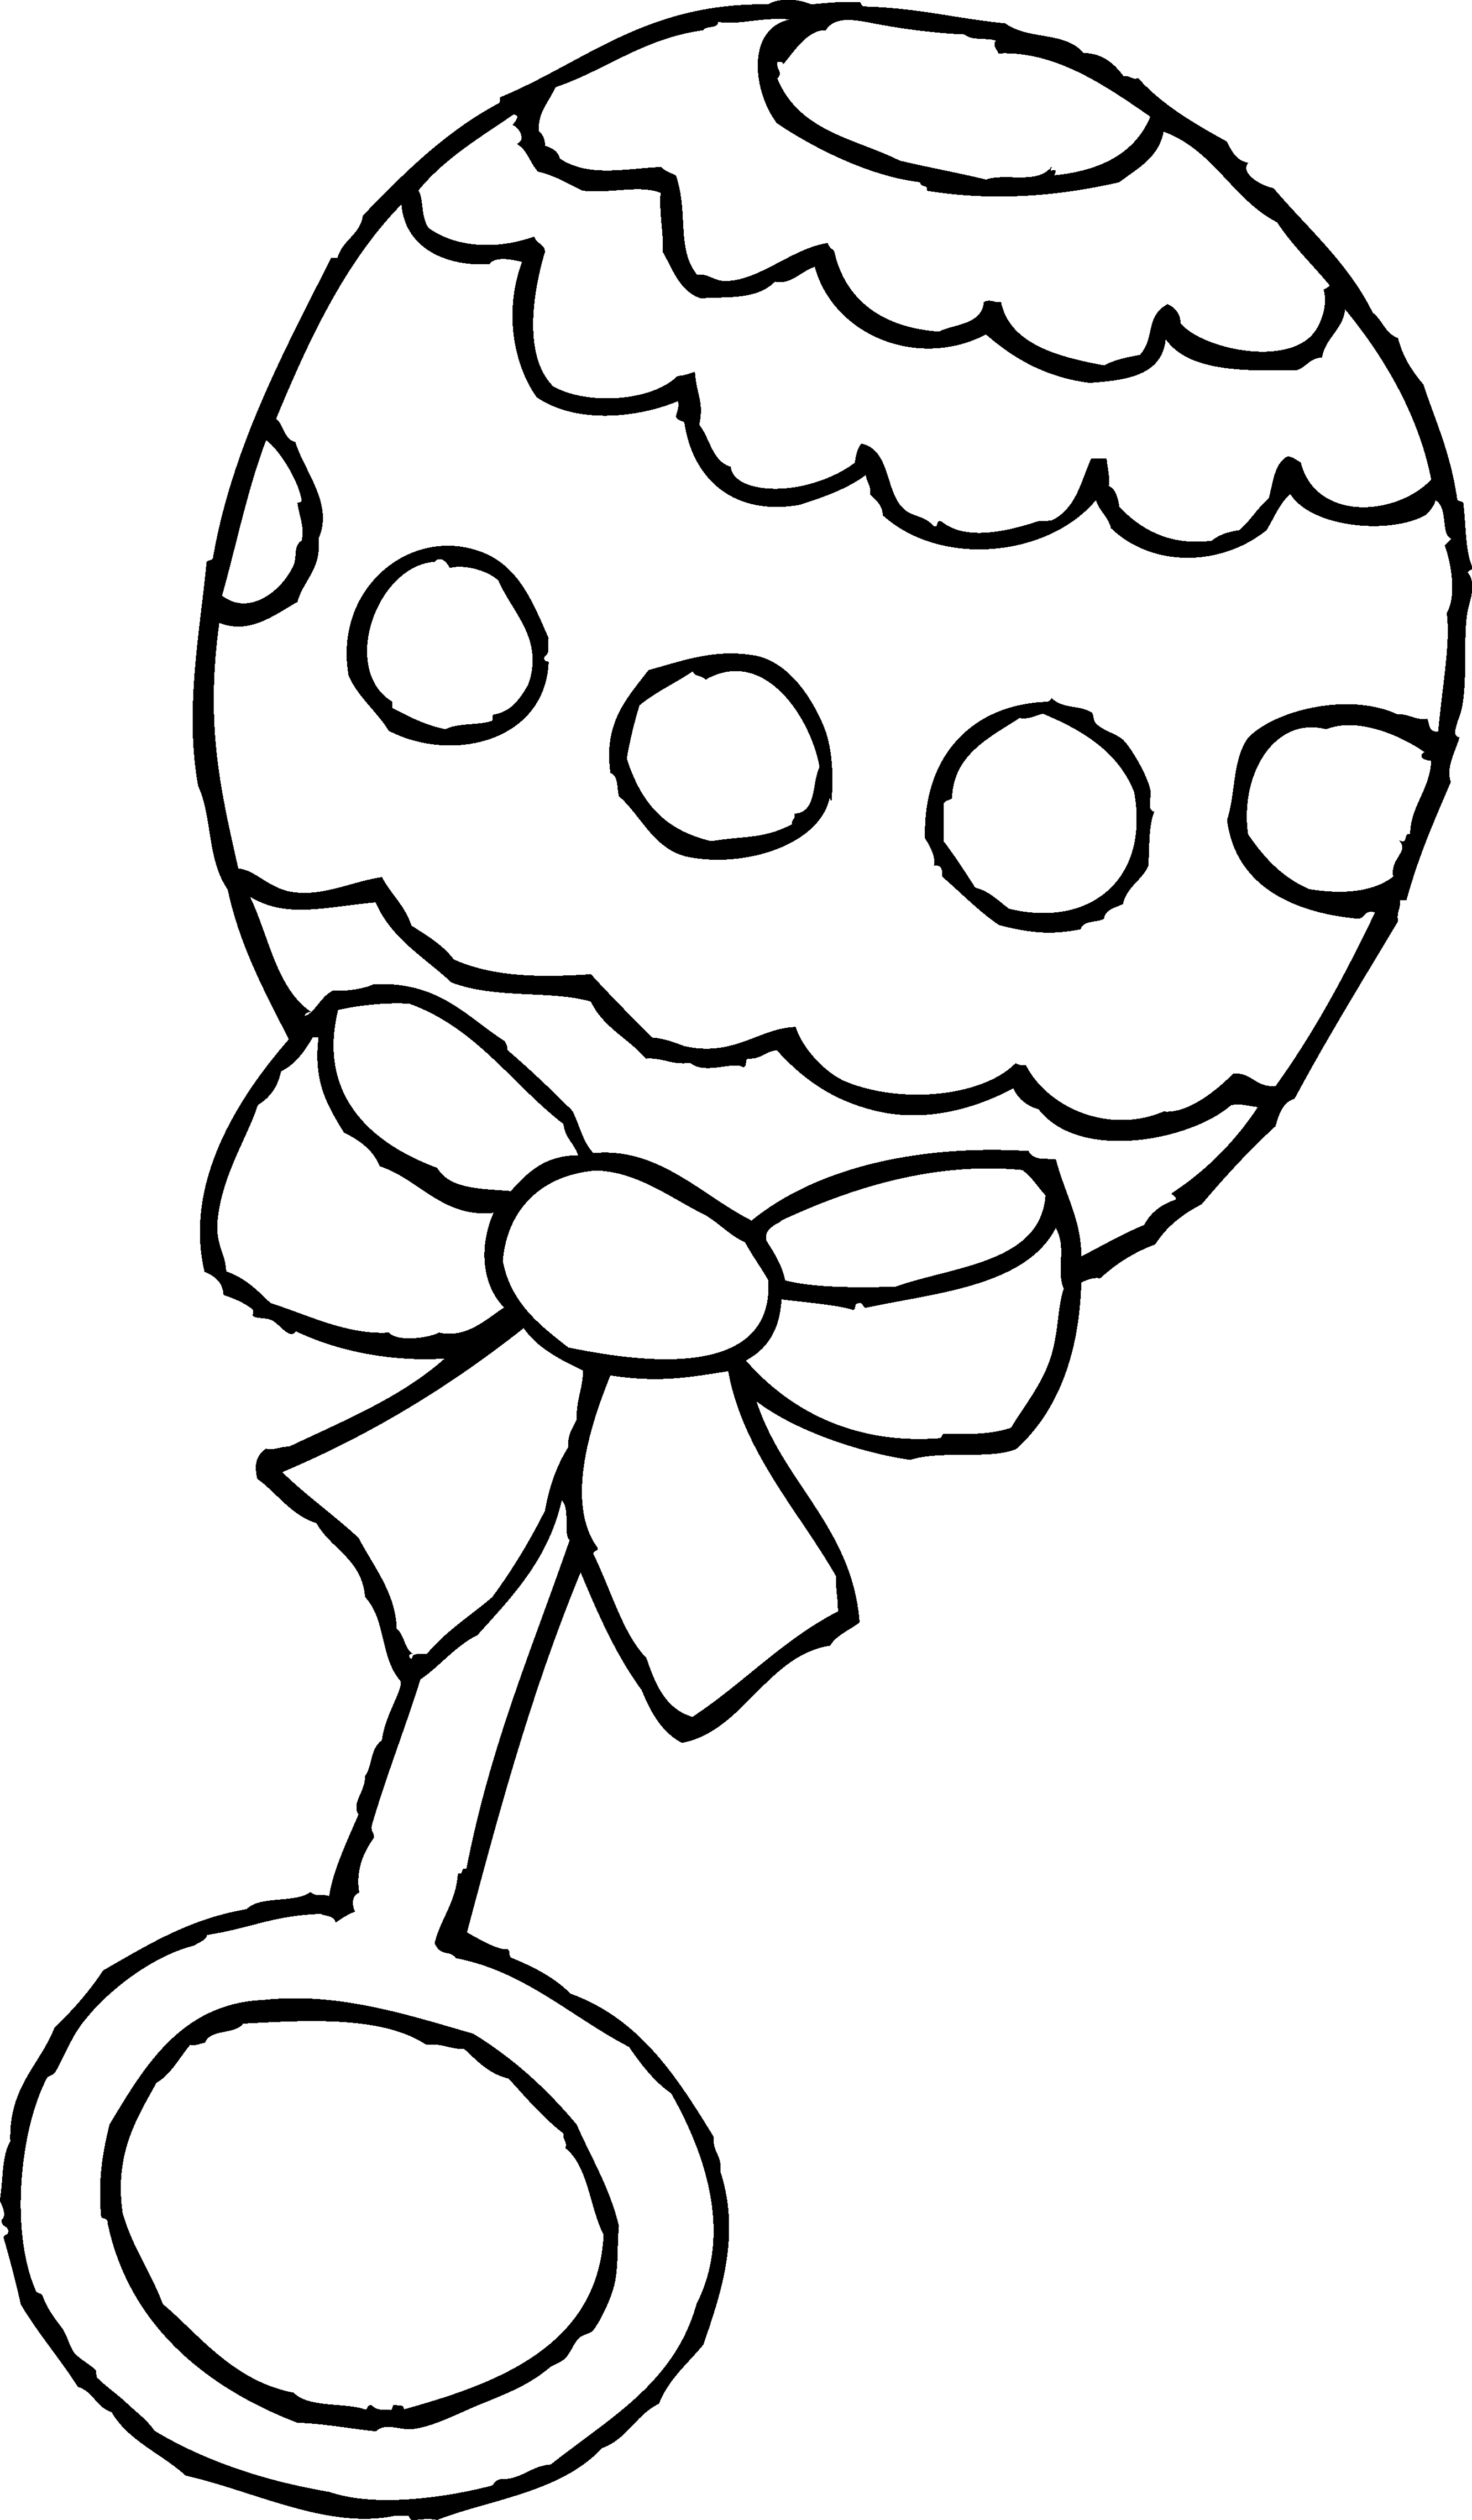 Baby rattle baby clipart black and white free to use clip art resource